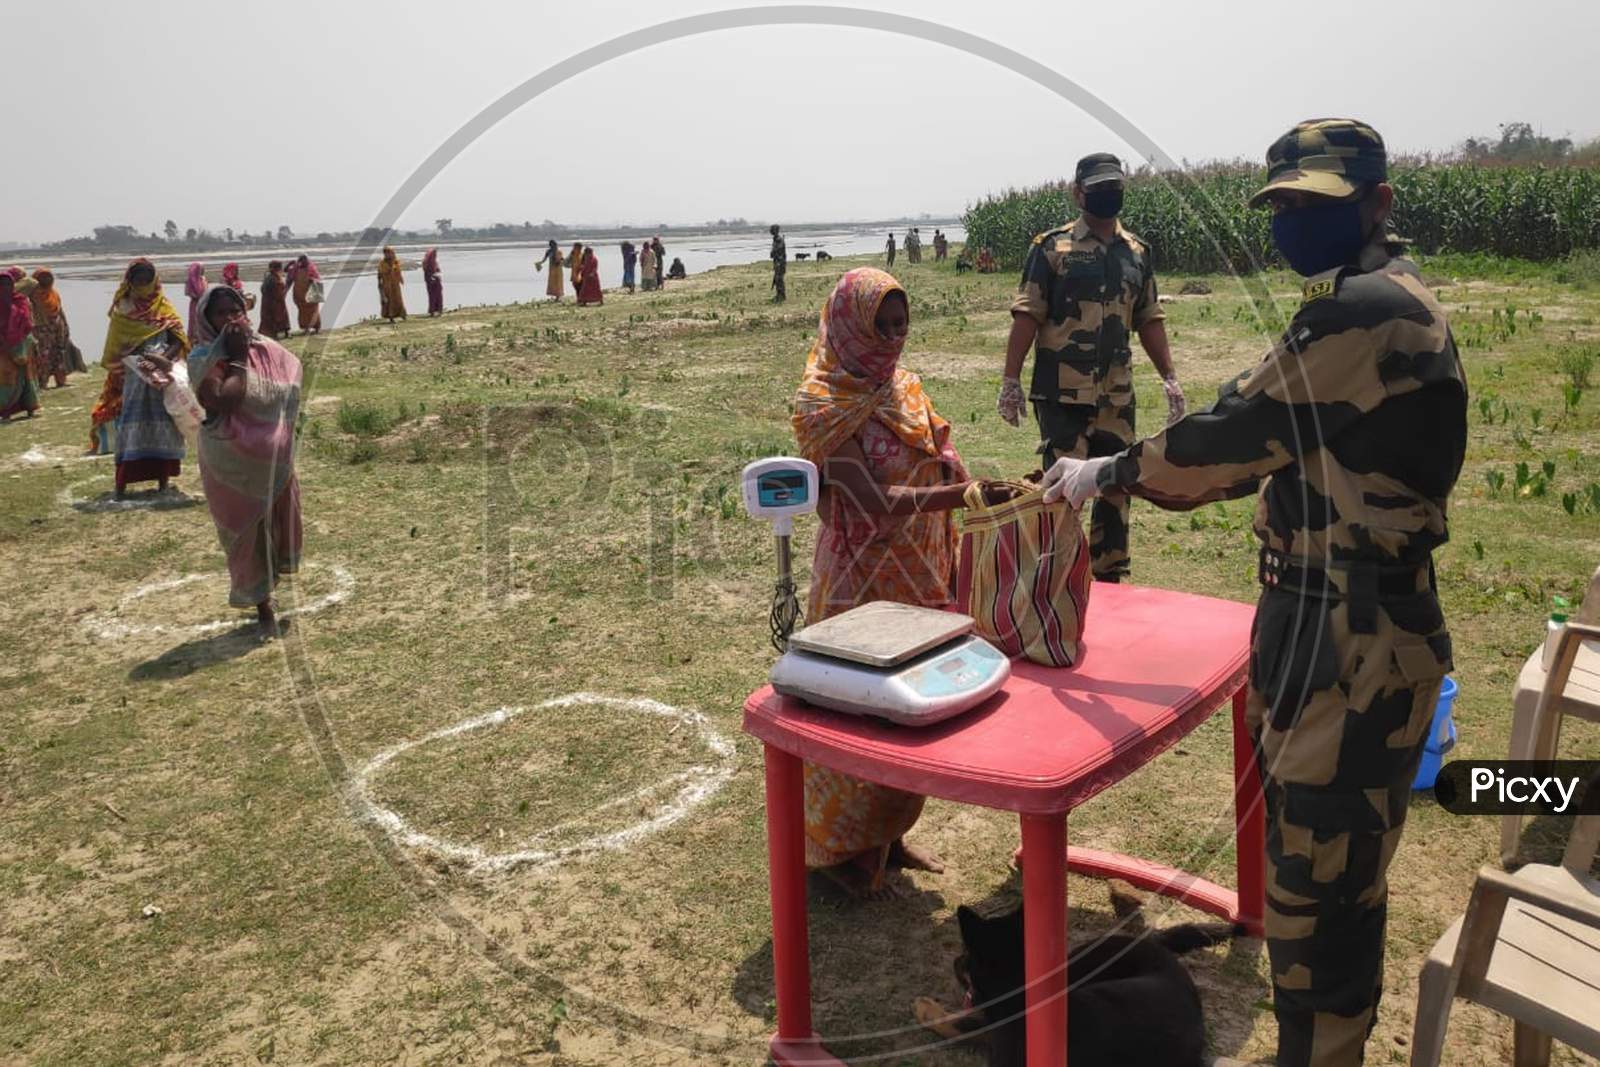 Border Security Forces Guwahati Frontier Distribute Ration To Needy People Of Border Village Joradharla in West Bengal''s Coochbehar district,  On April 11,2020.